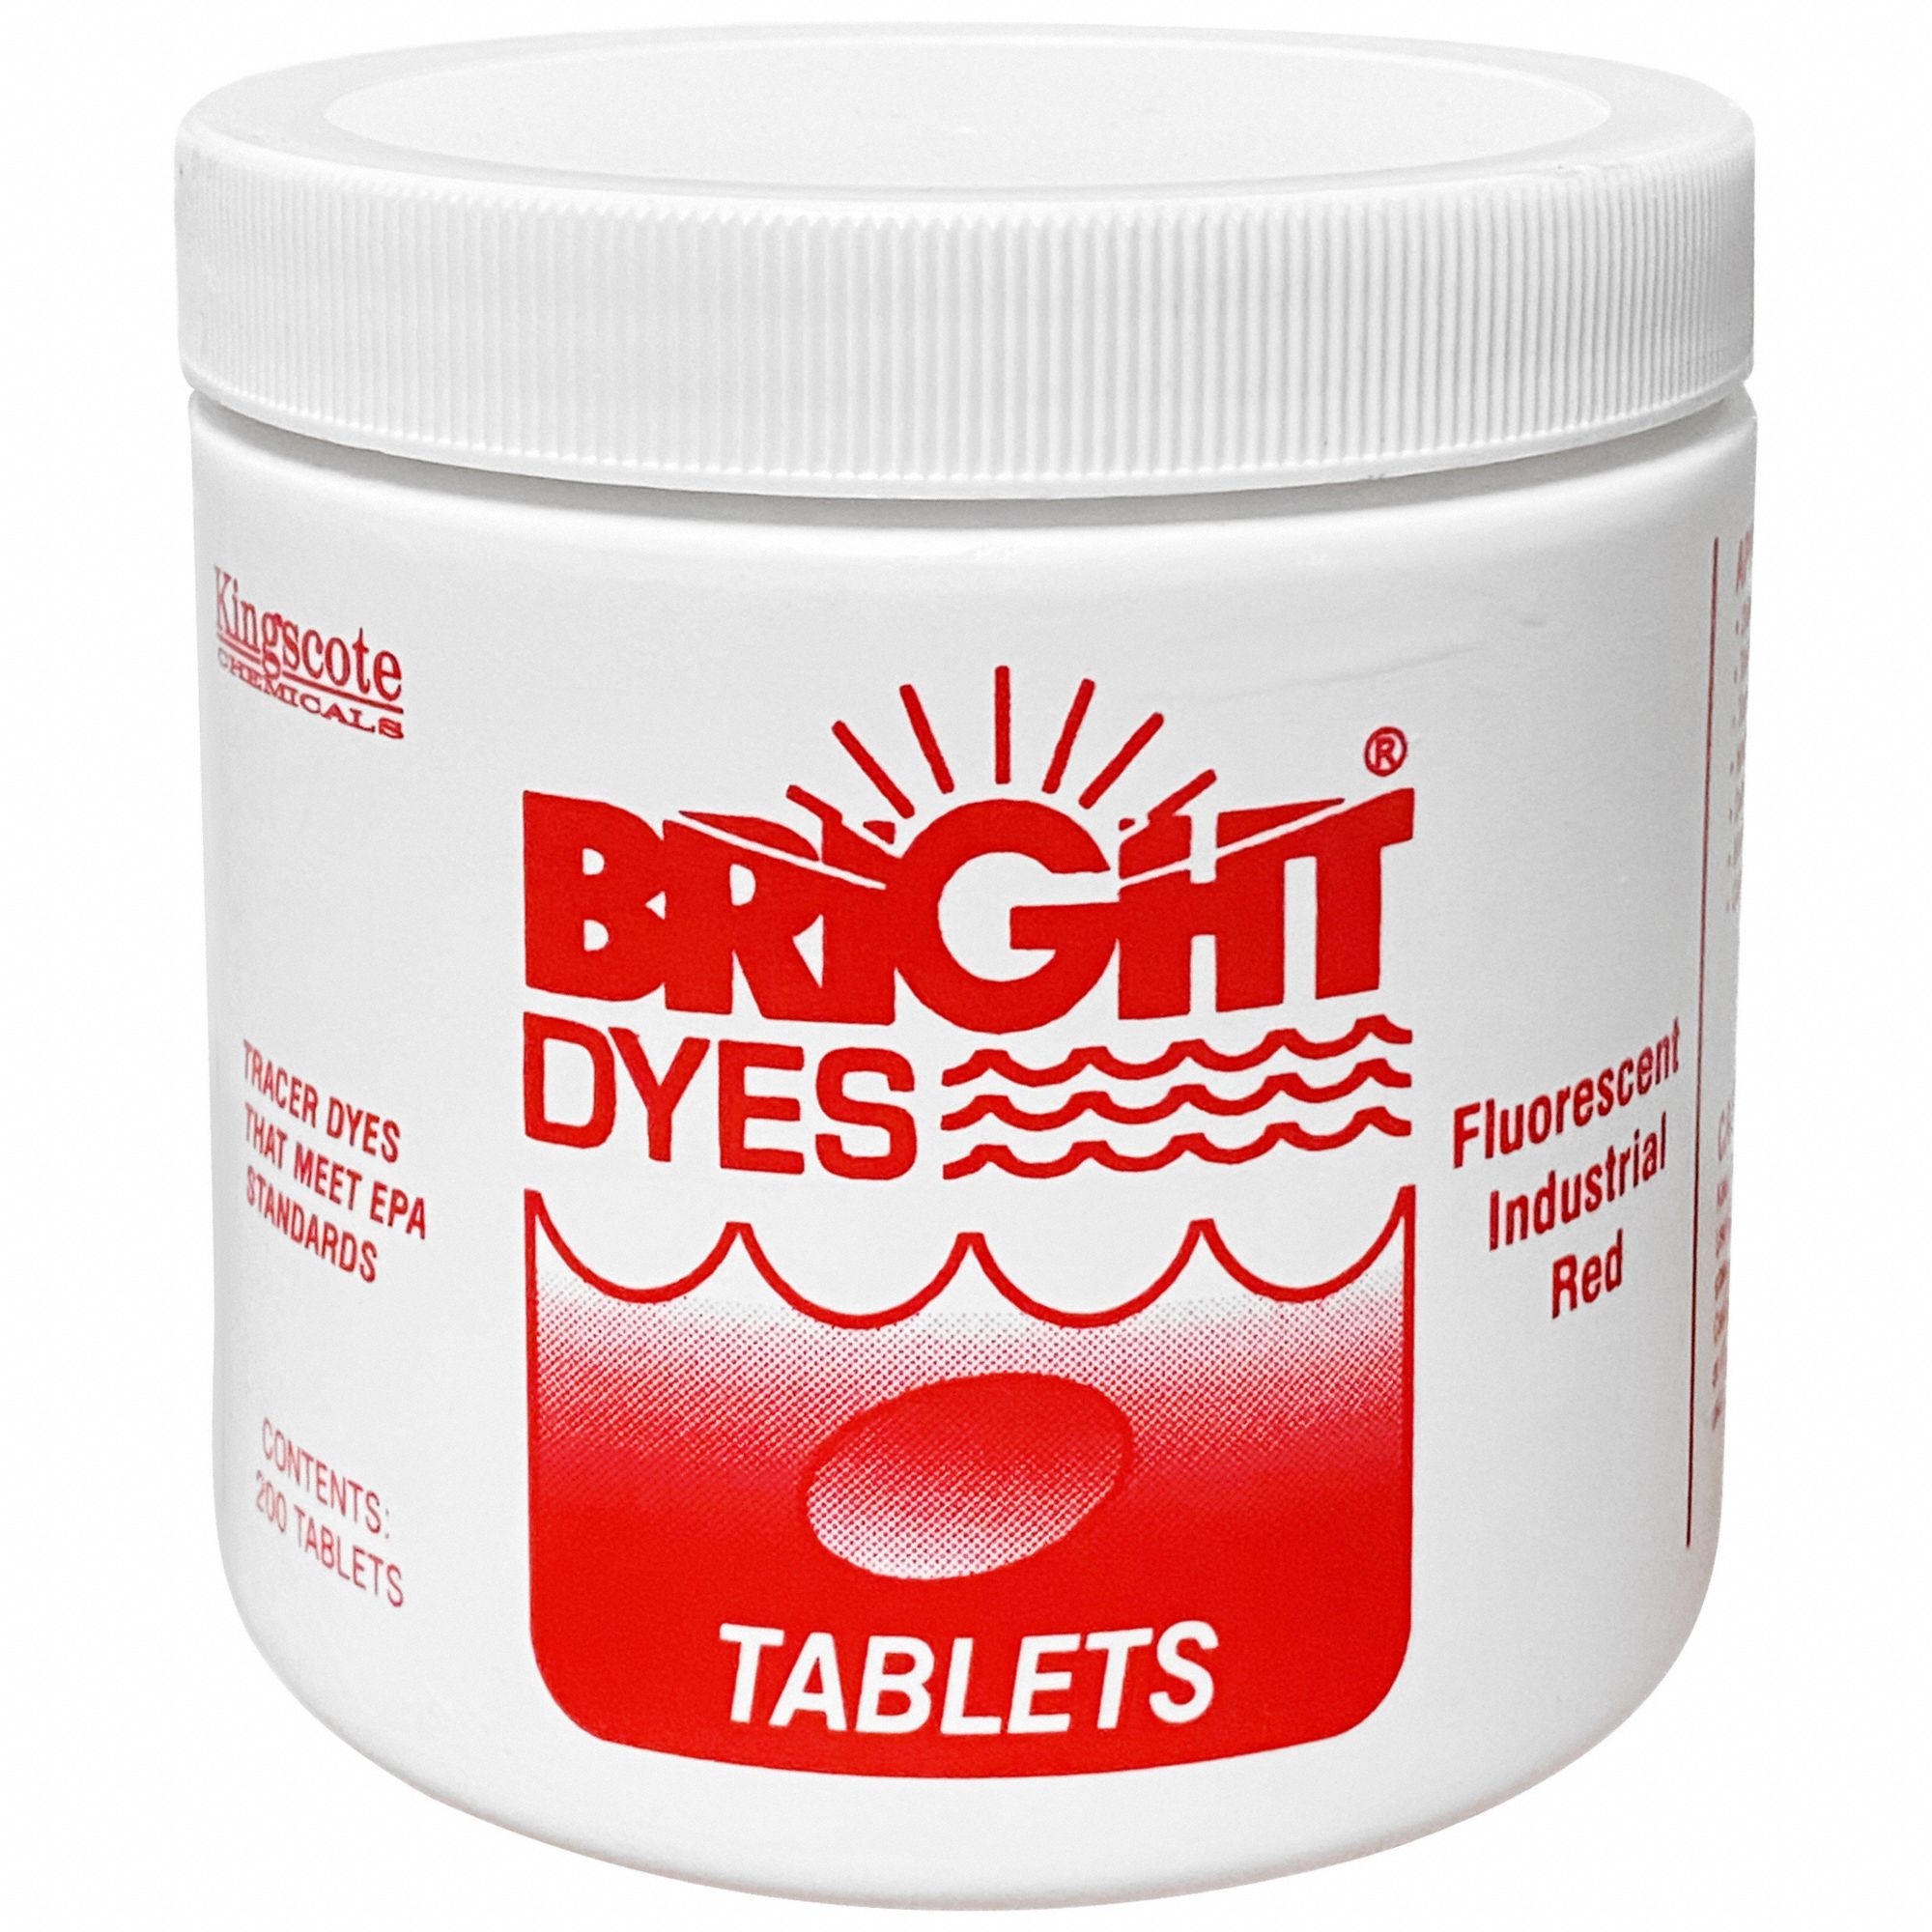 Dye Tracer Tablet: Red, 1.05 g Container Size, Water Tracing Dye, 3 to 6 min, <lt/>100 ppb